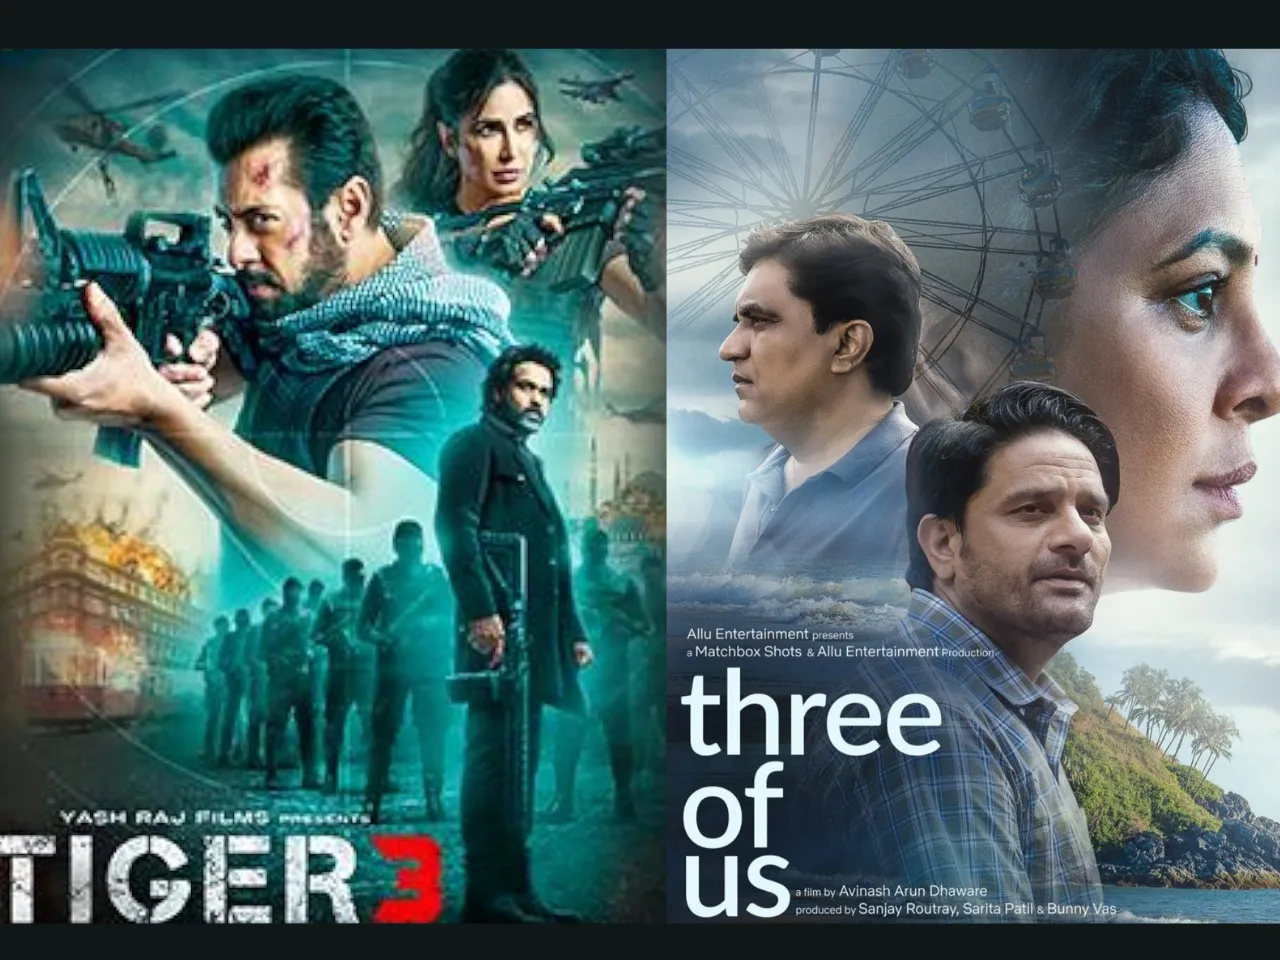 10 theatrical releases in November that make for a great Diwali dhamaka!